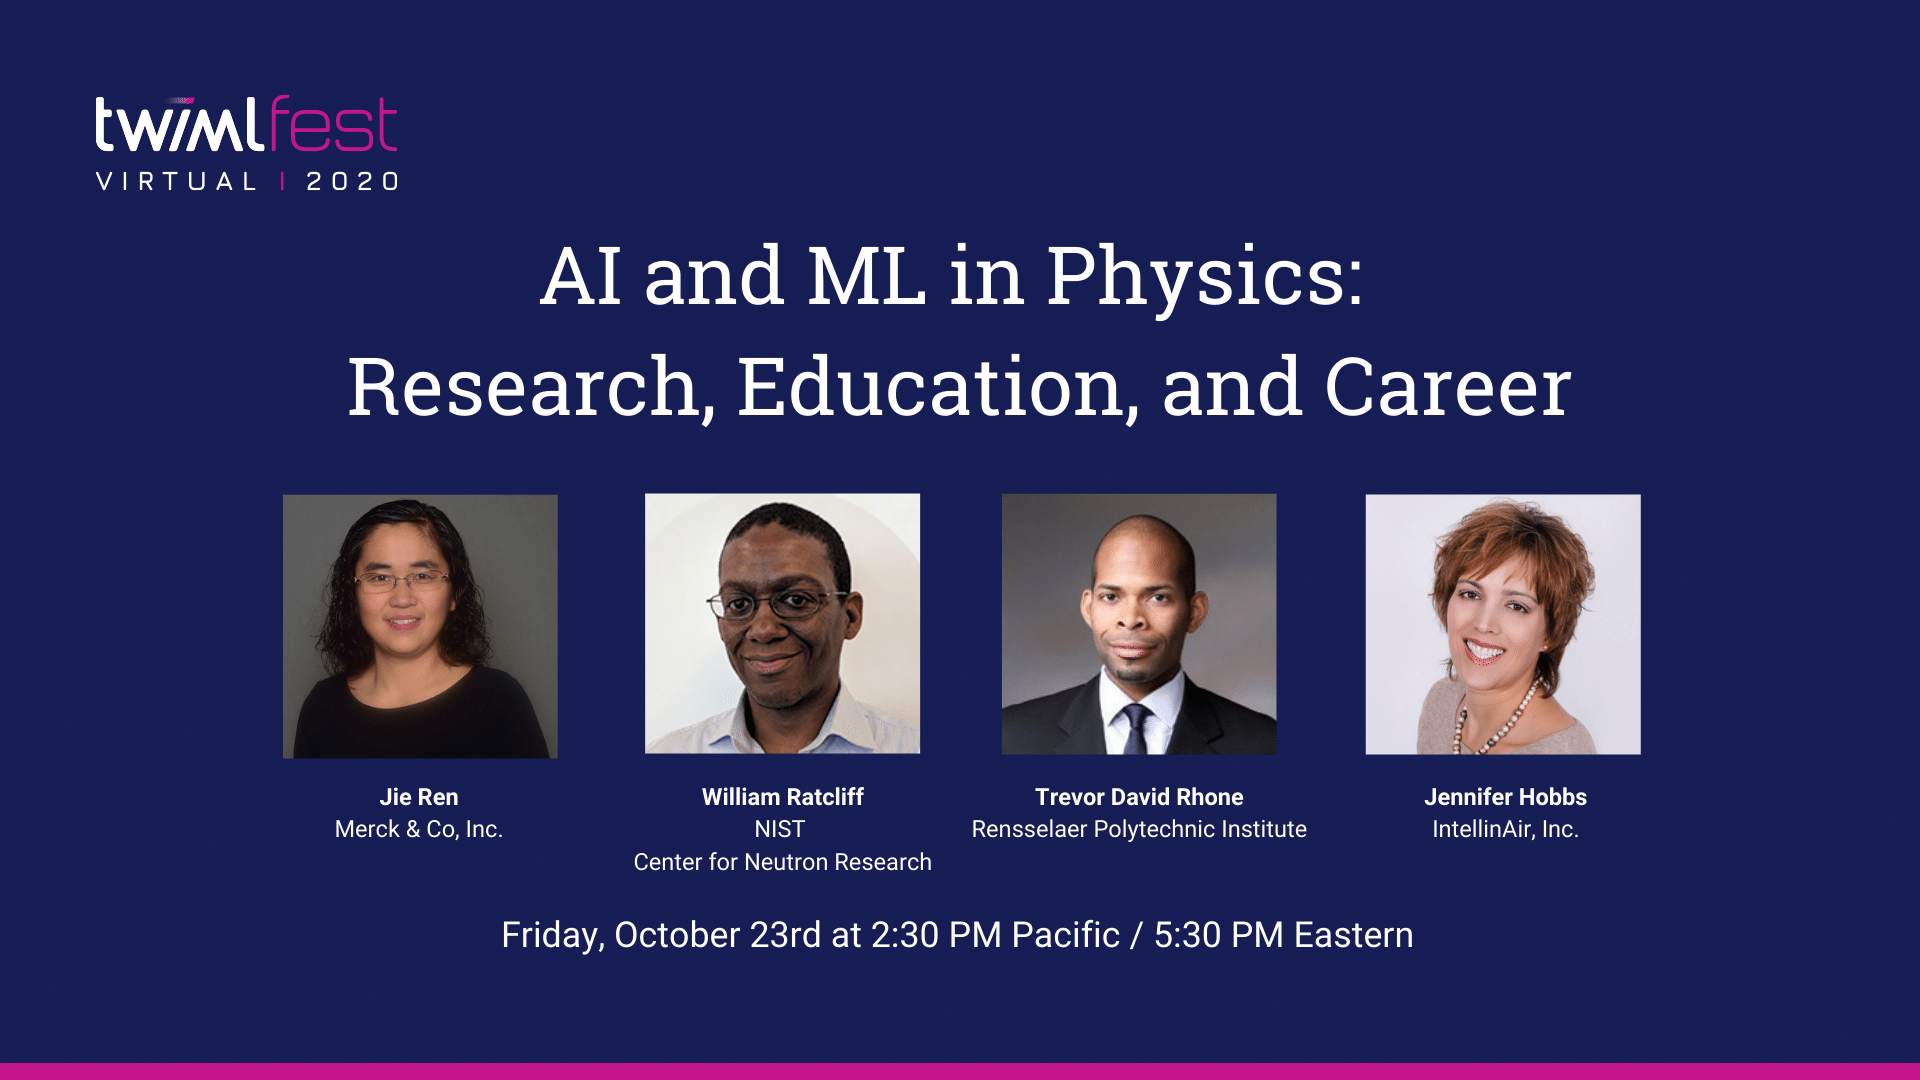 AI and ML in Physics: Research, Education, and Career